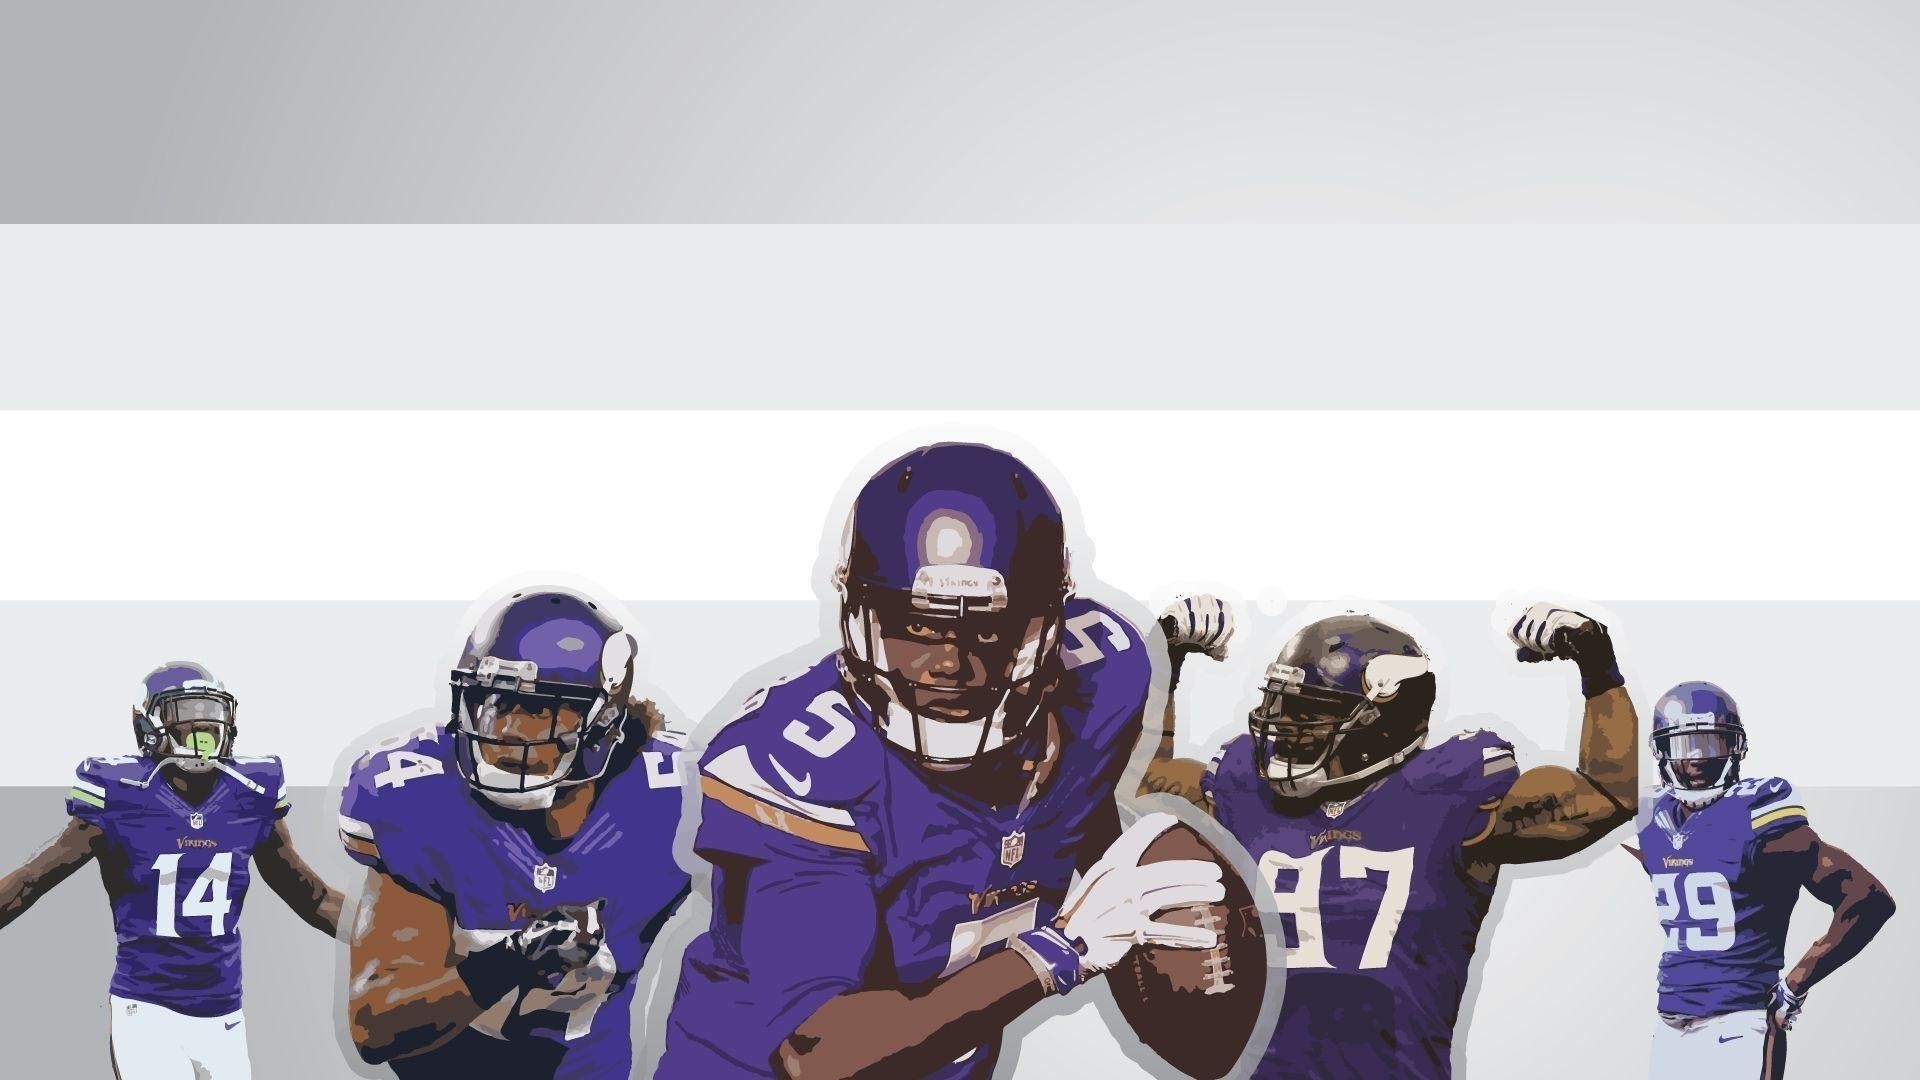 HD Minnesota Vikings Backgrounds with high-resolution 1920x1080 pixel. Download and set as wallpaper for Desktop Computer, Apple iPhone X, XS Max, XR, 8, 7, 6, SE, iPad, Android